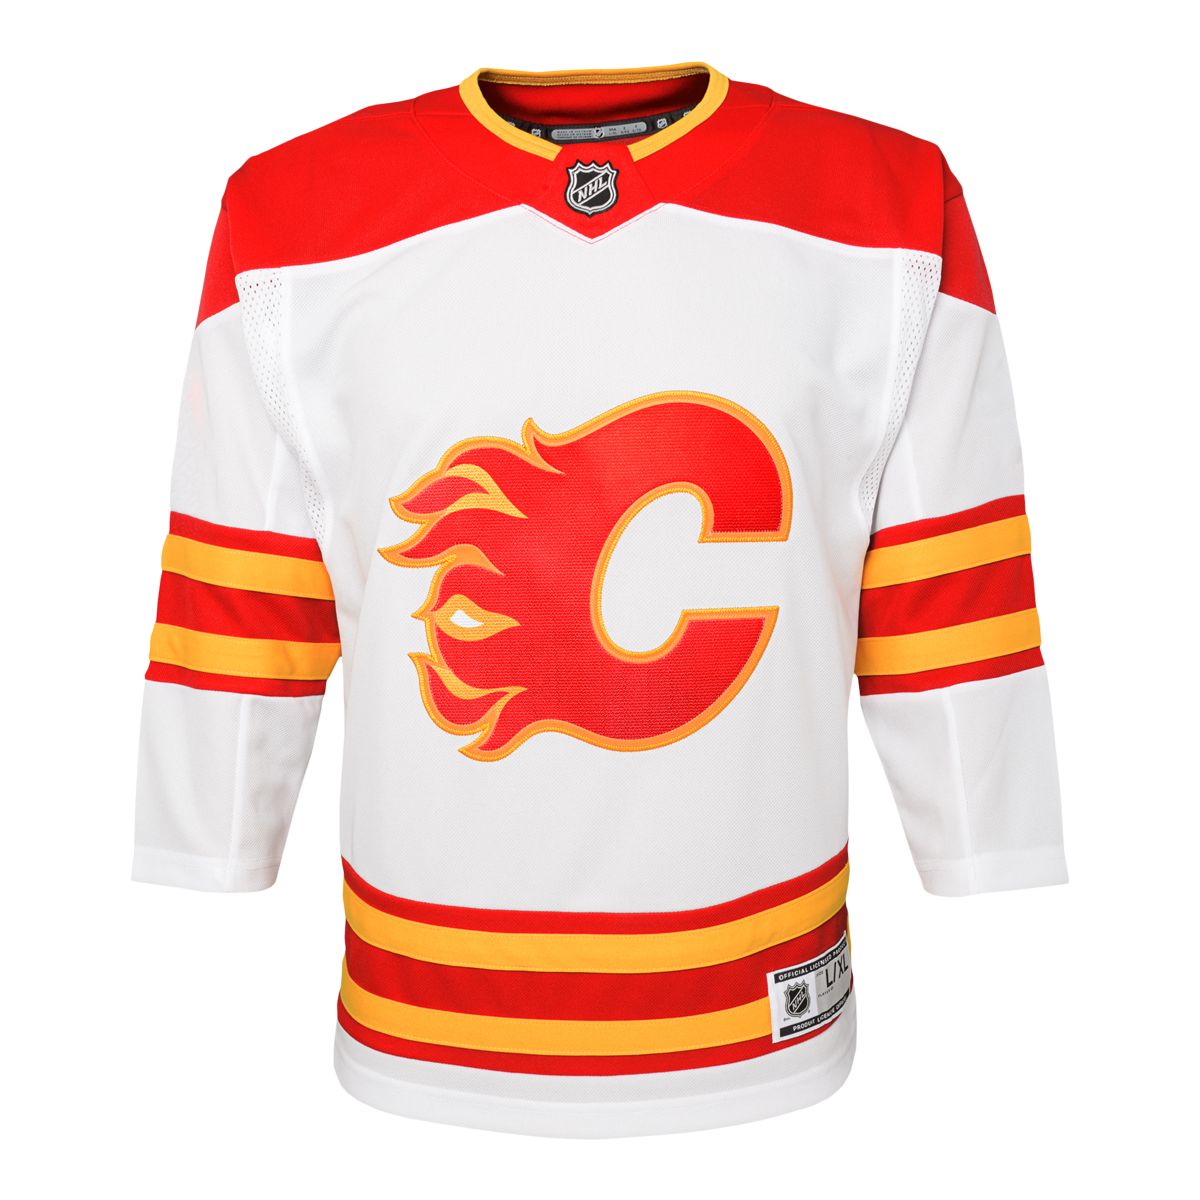 Youth Calgary Flames Outerstuff CC Premier Jersey